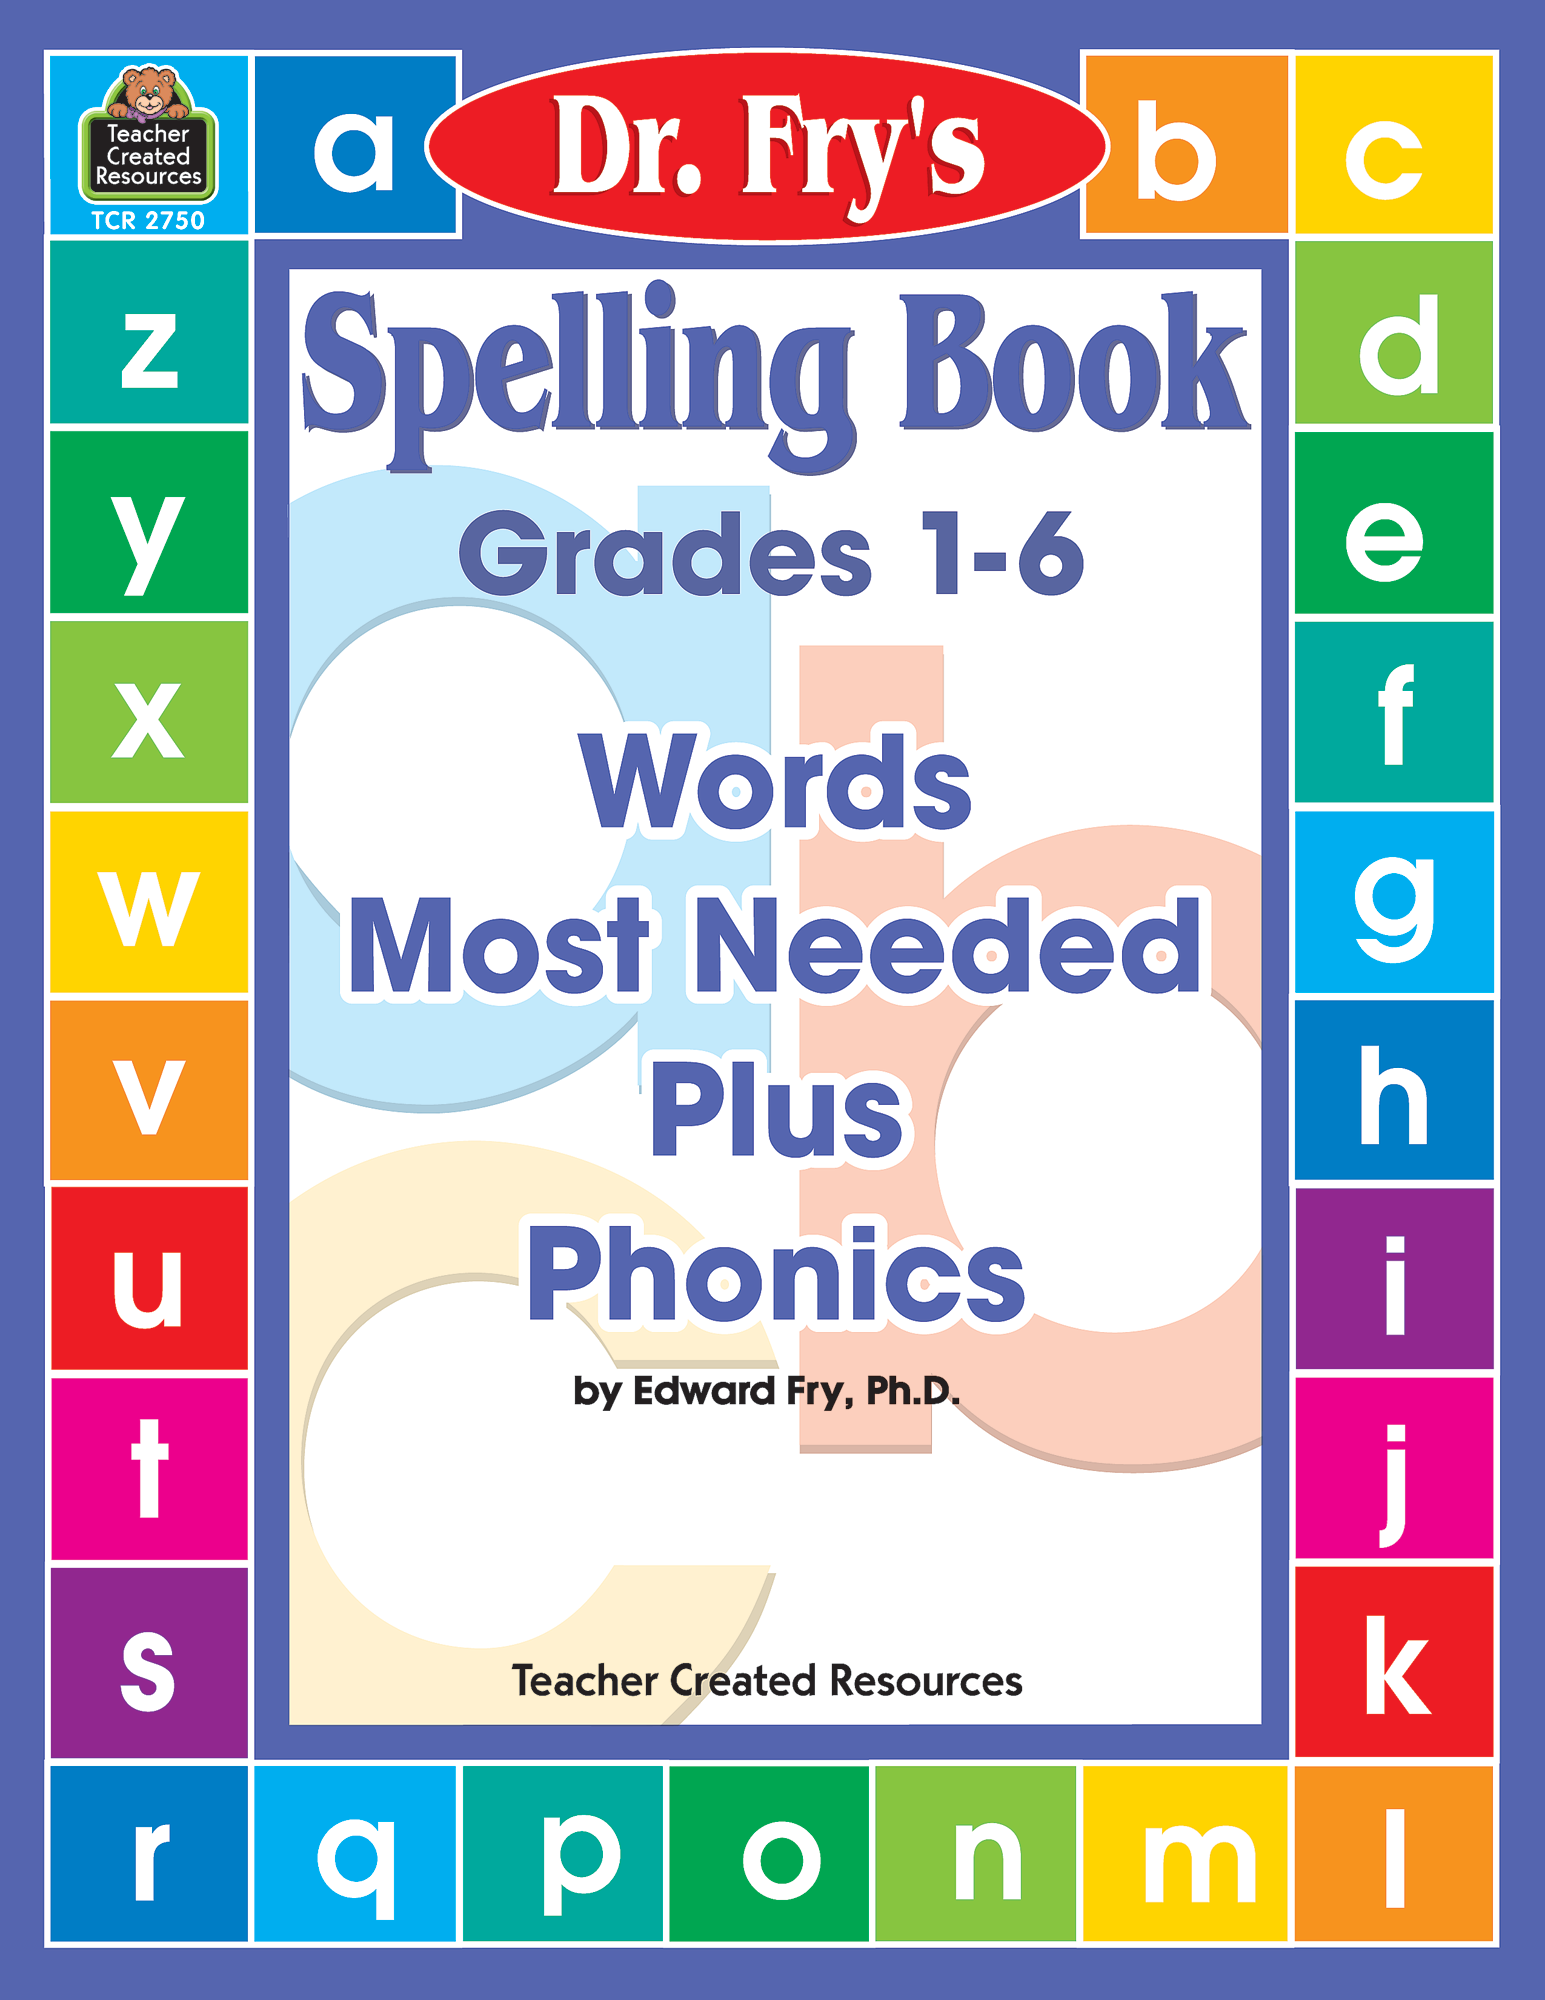 Spelling Book: Words Most Needed Plus Phonics by Dr. Fry (Gr. 1â€“6)